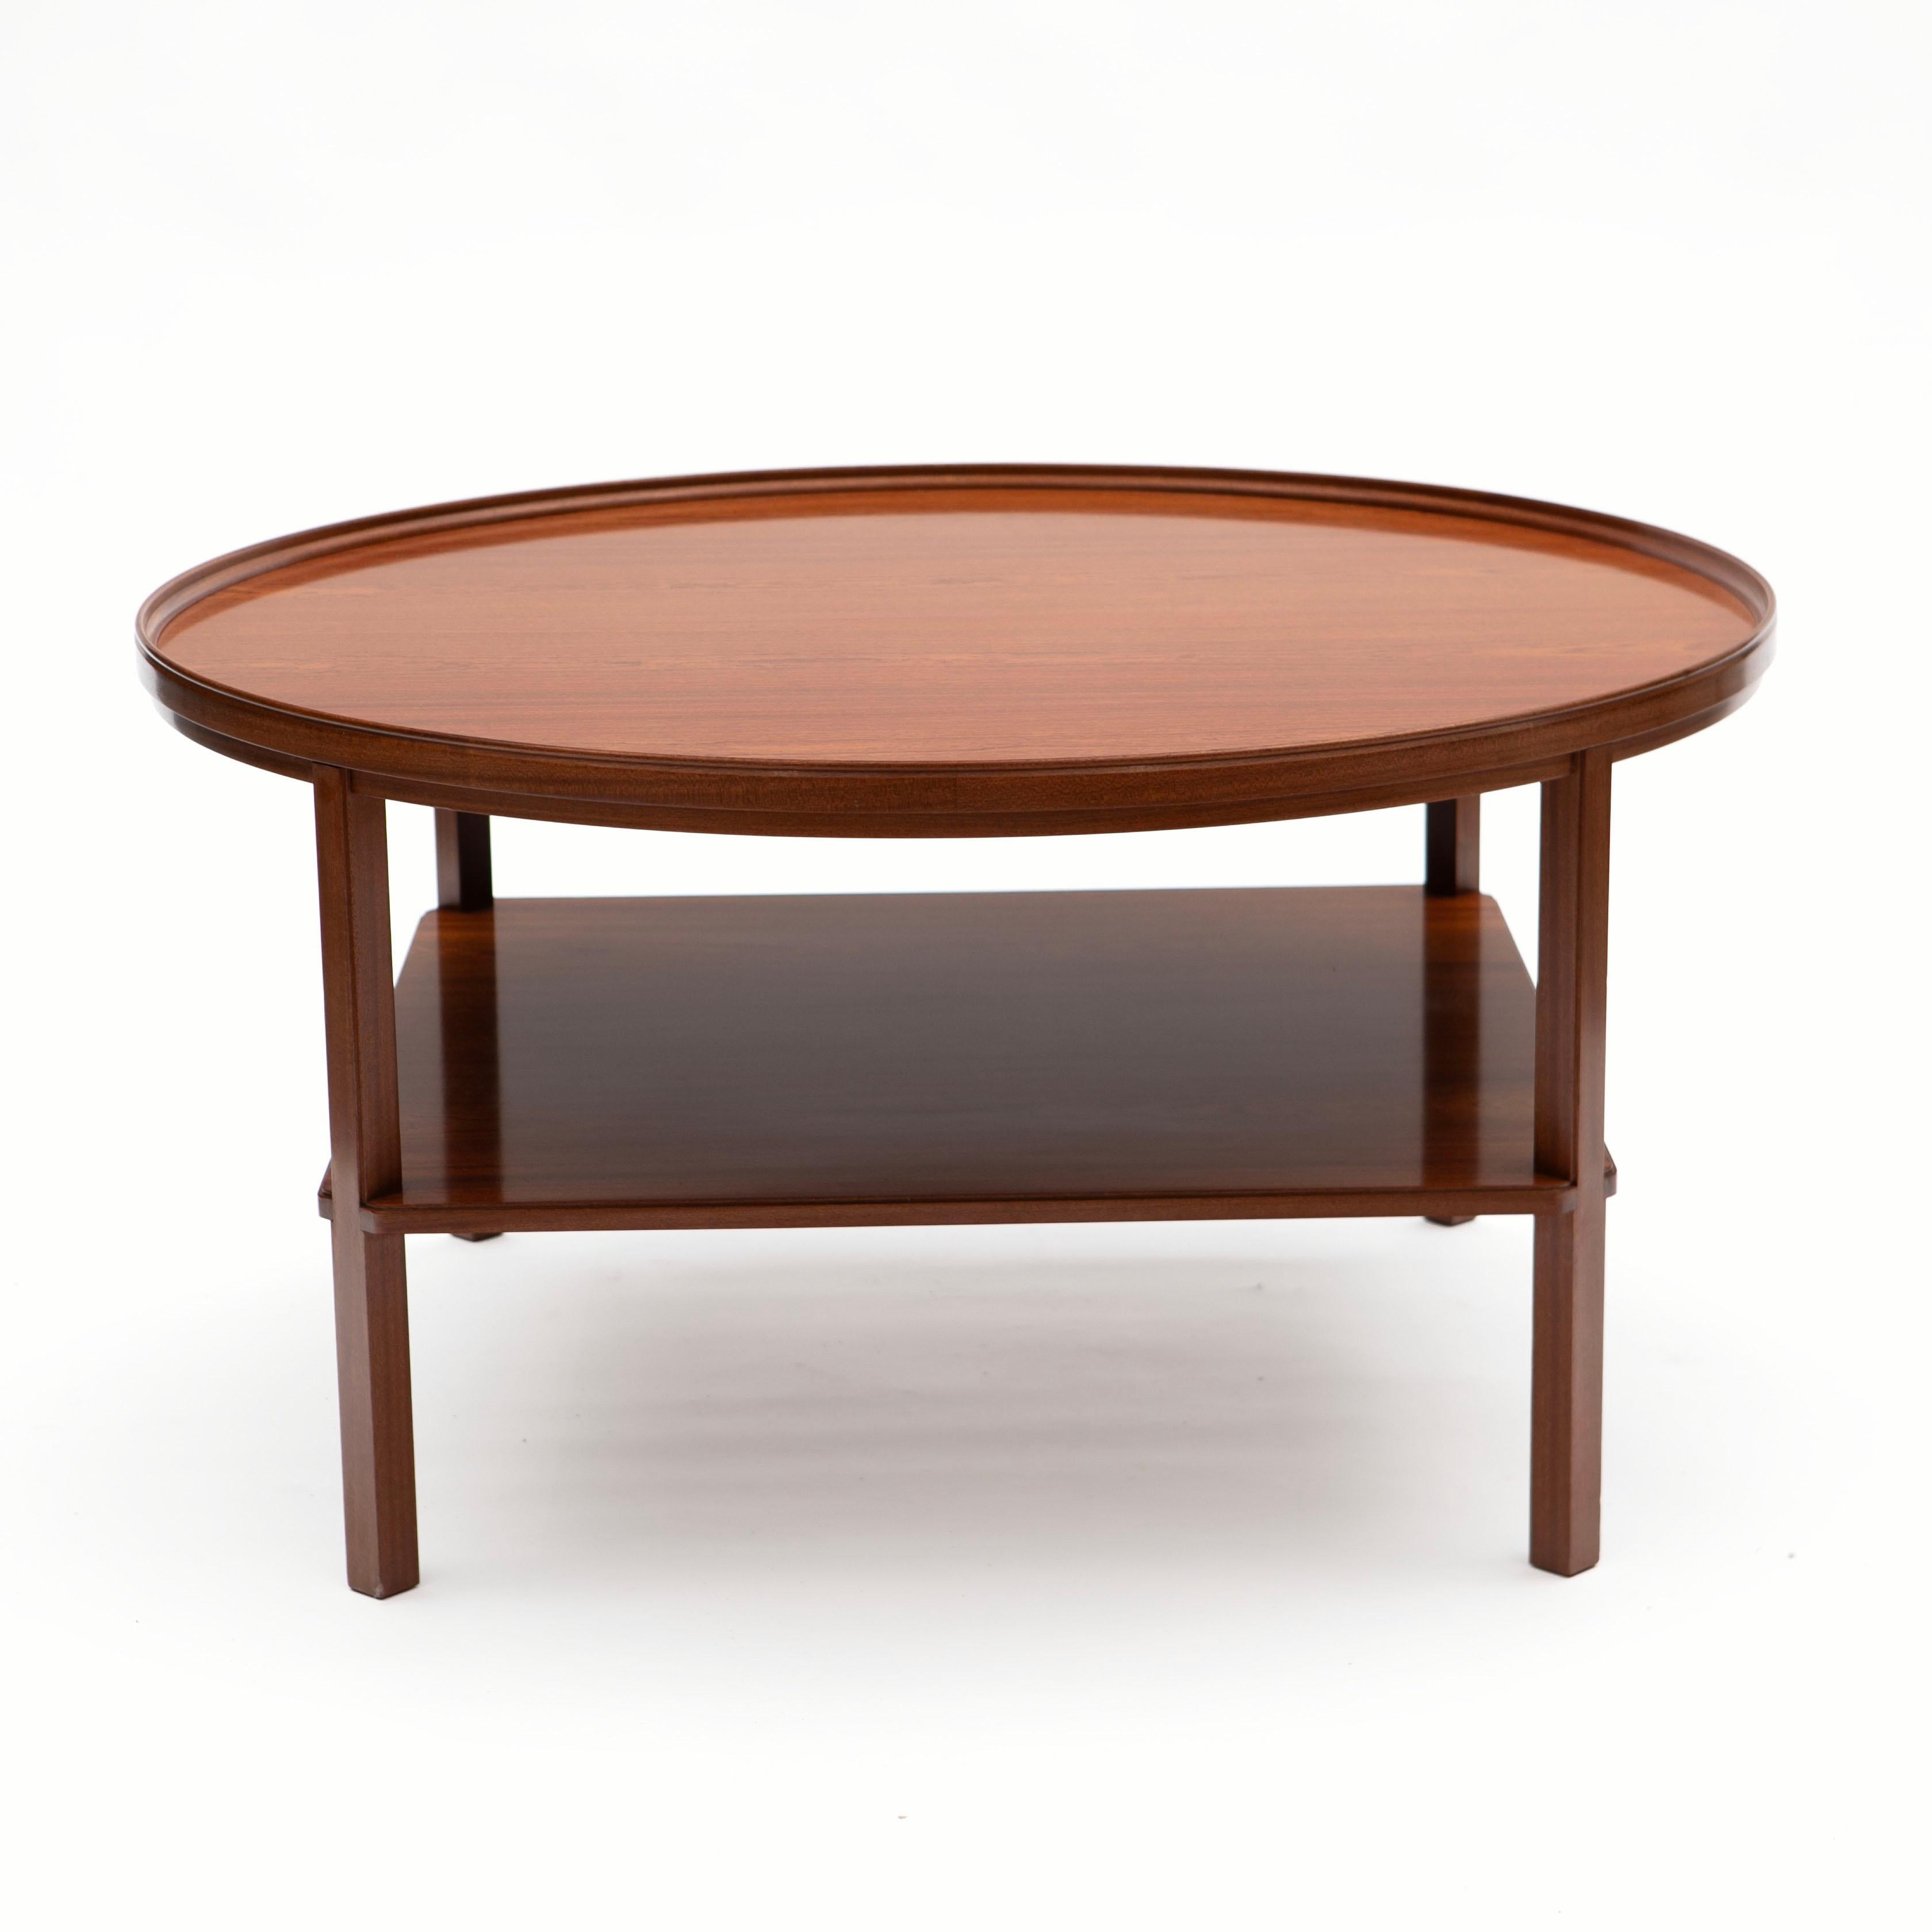 Kaare Klint 1888 - 1954.
Round coffee table, “Rygebord” model KK6687, made in mahogany with beautiful grain. The table features an elegant, raised band that wraps around the tabletop with a functional shelf below, supported by slightly angled legs.